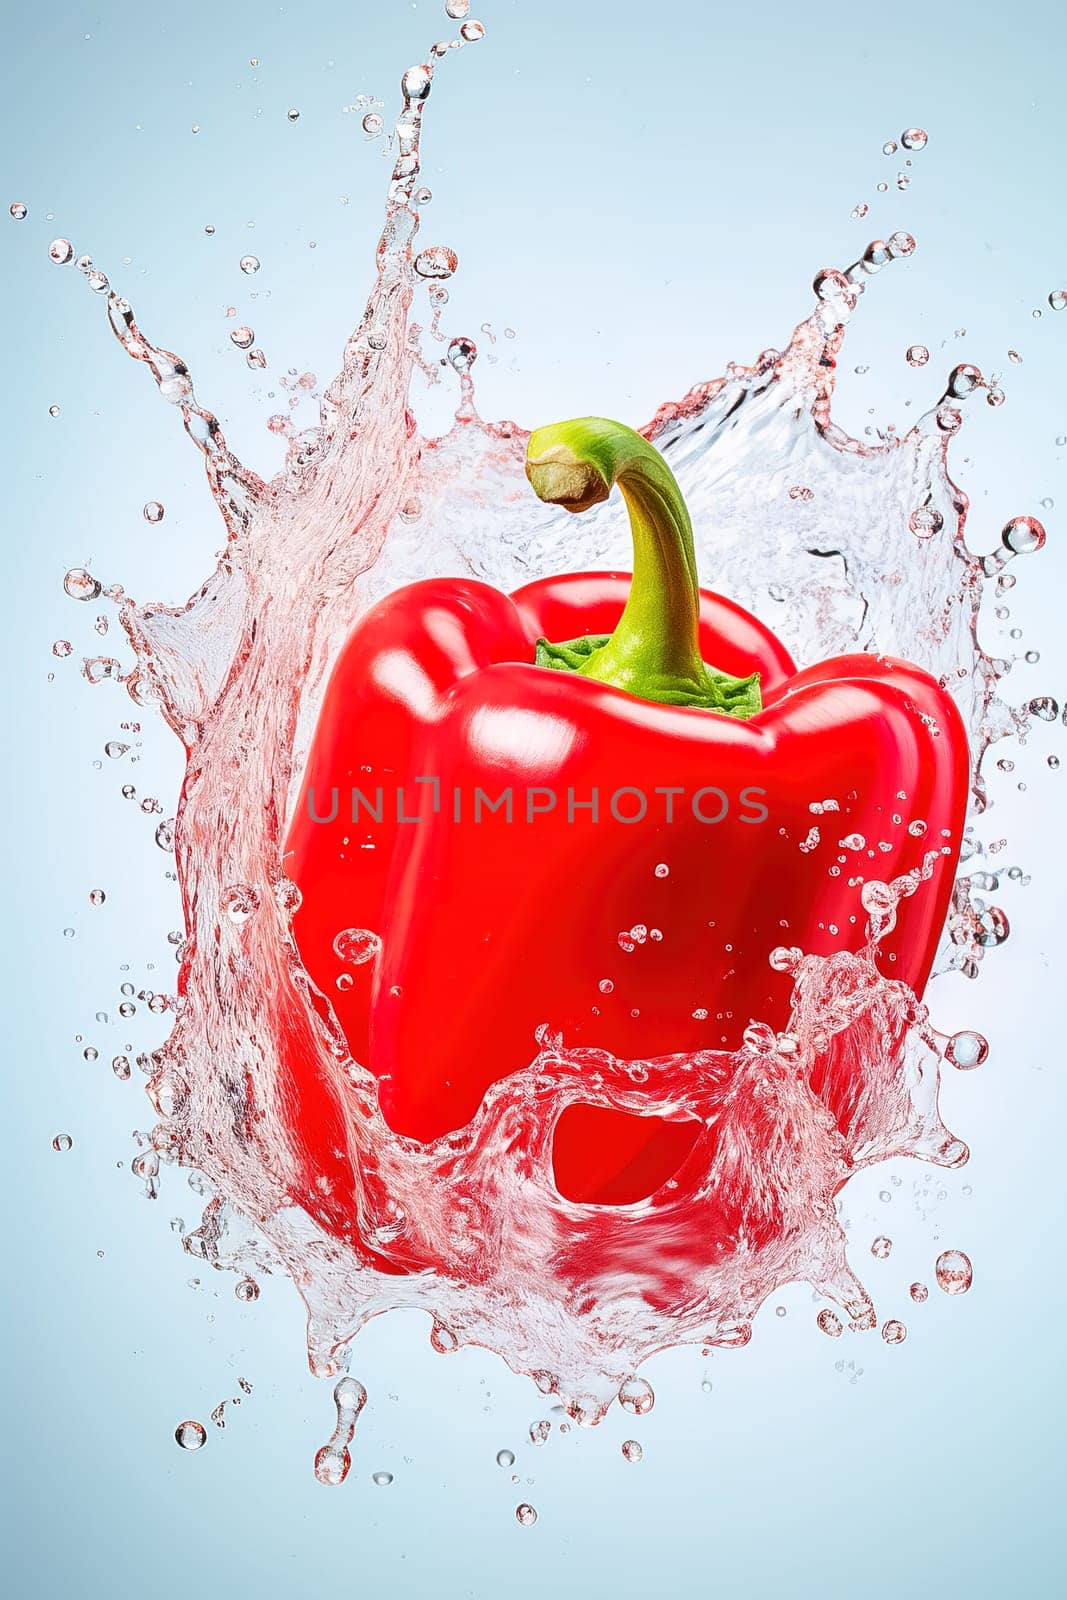 Red pepper with water splash. Close-up. by Yurich32